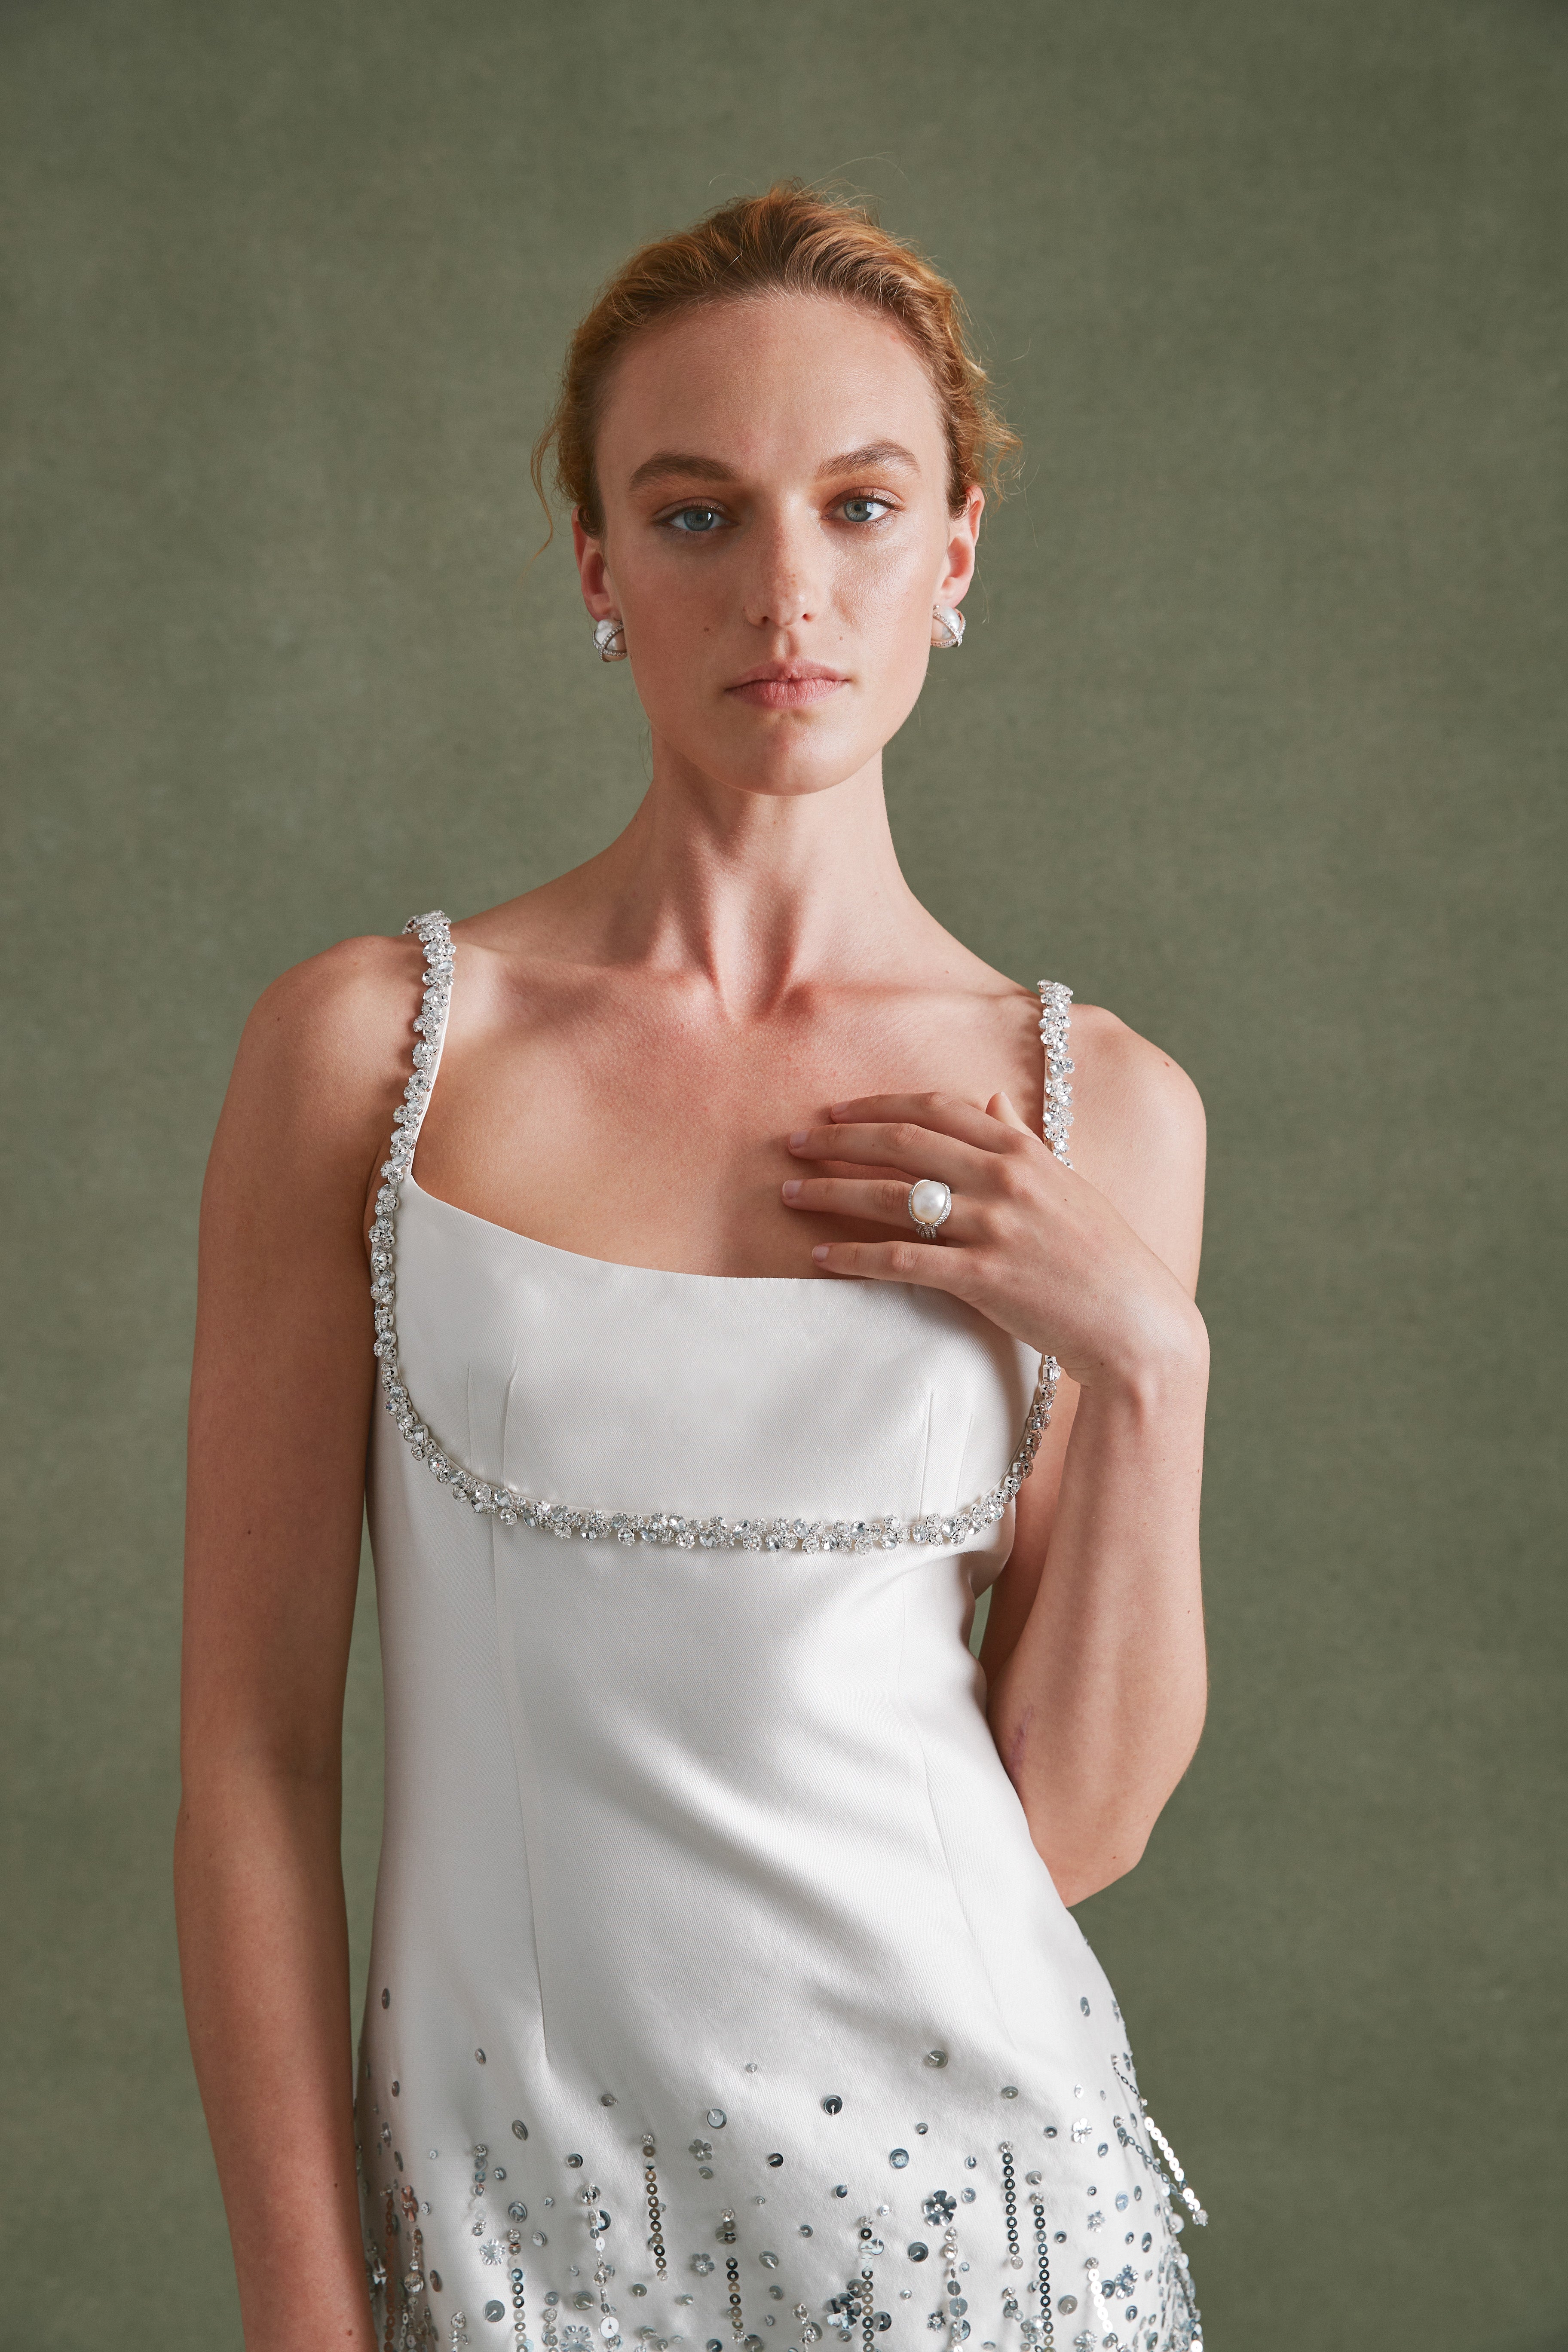 Alexandra Pijut Stella Dress in ivory silk wool with silver fringe and beading. Bridal, bride, after party, rehearsal dinner outfit.